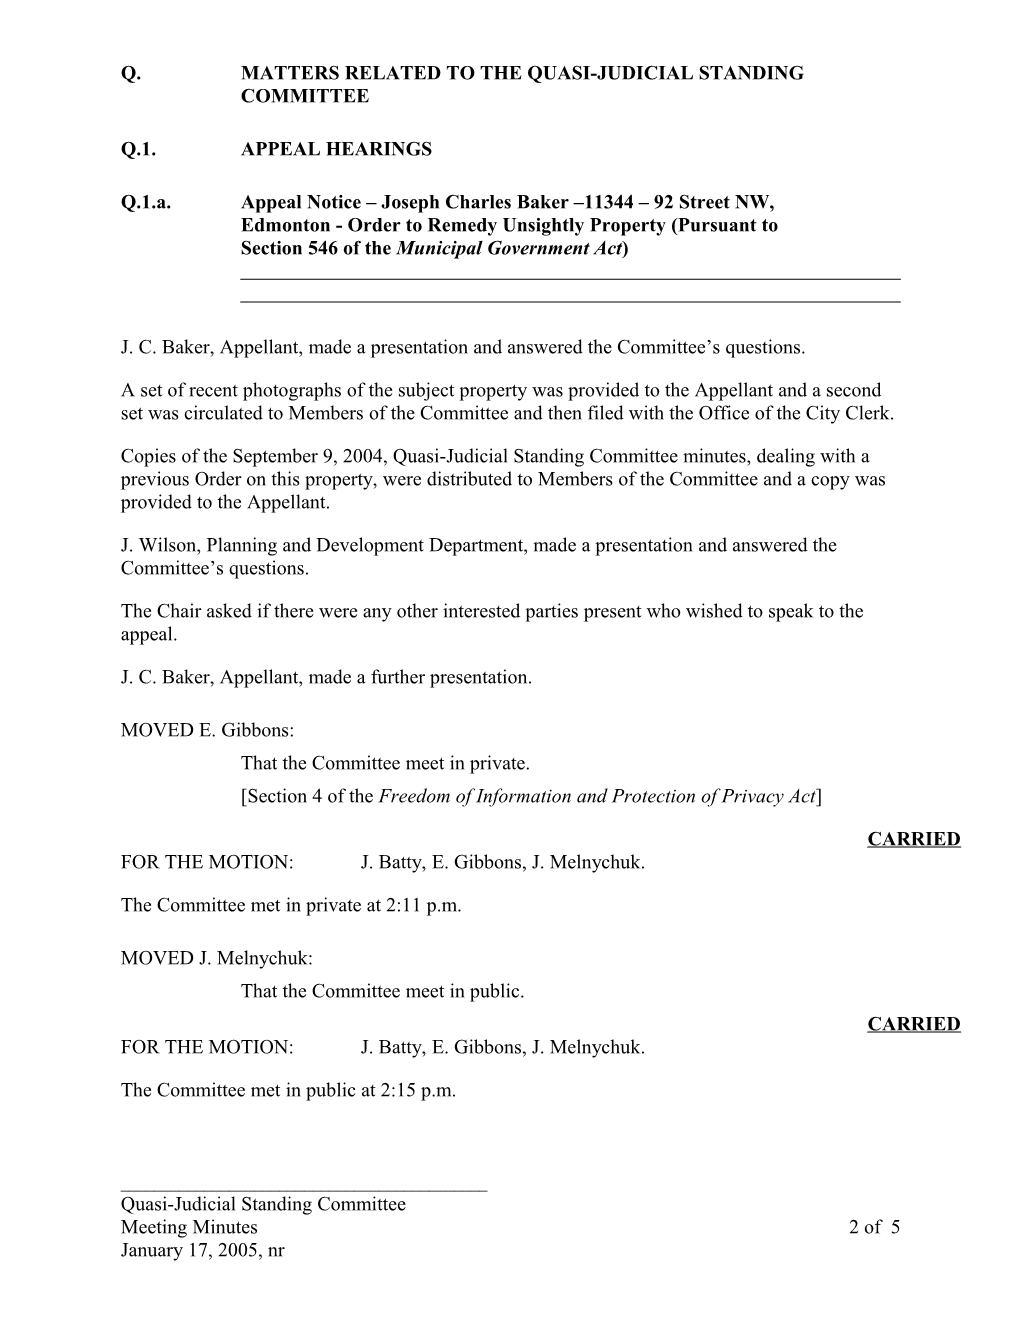 Minutes for Quasi-Judicial Standing Committee January 17, 2005 Meeting